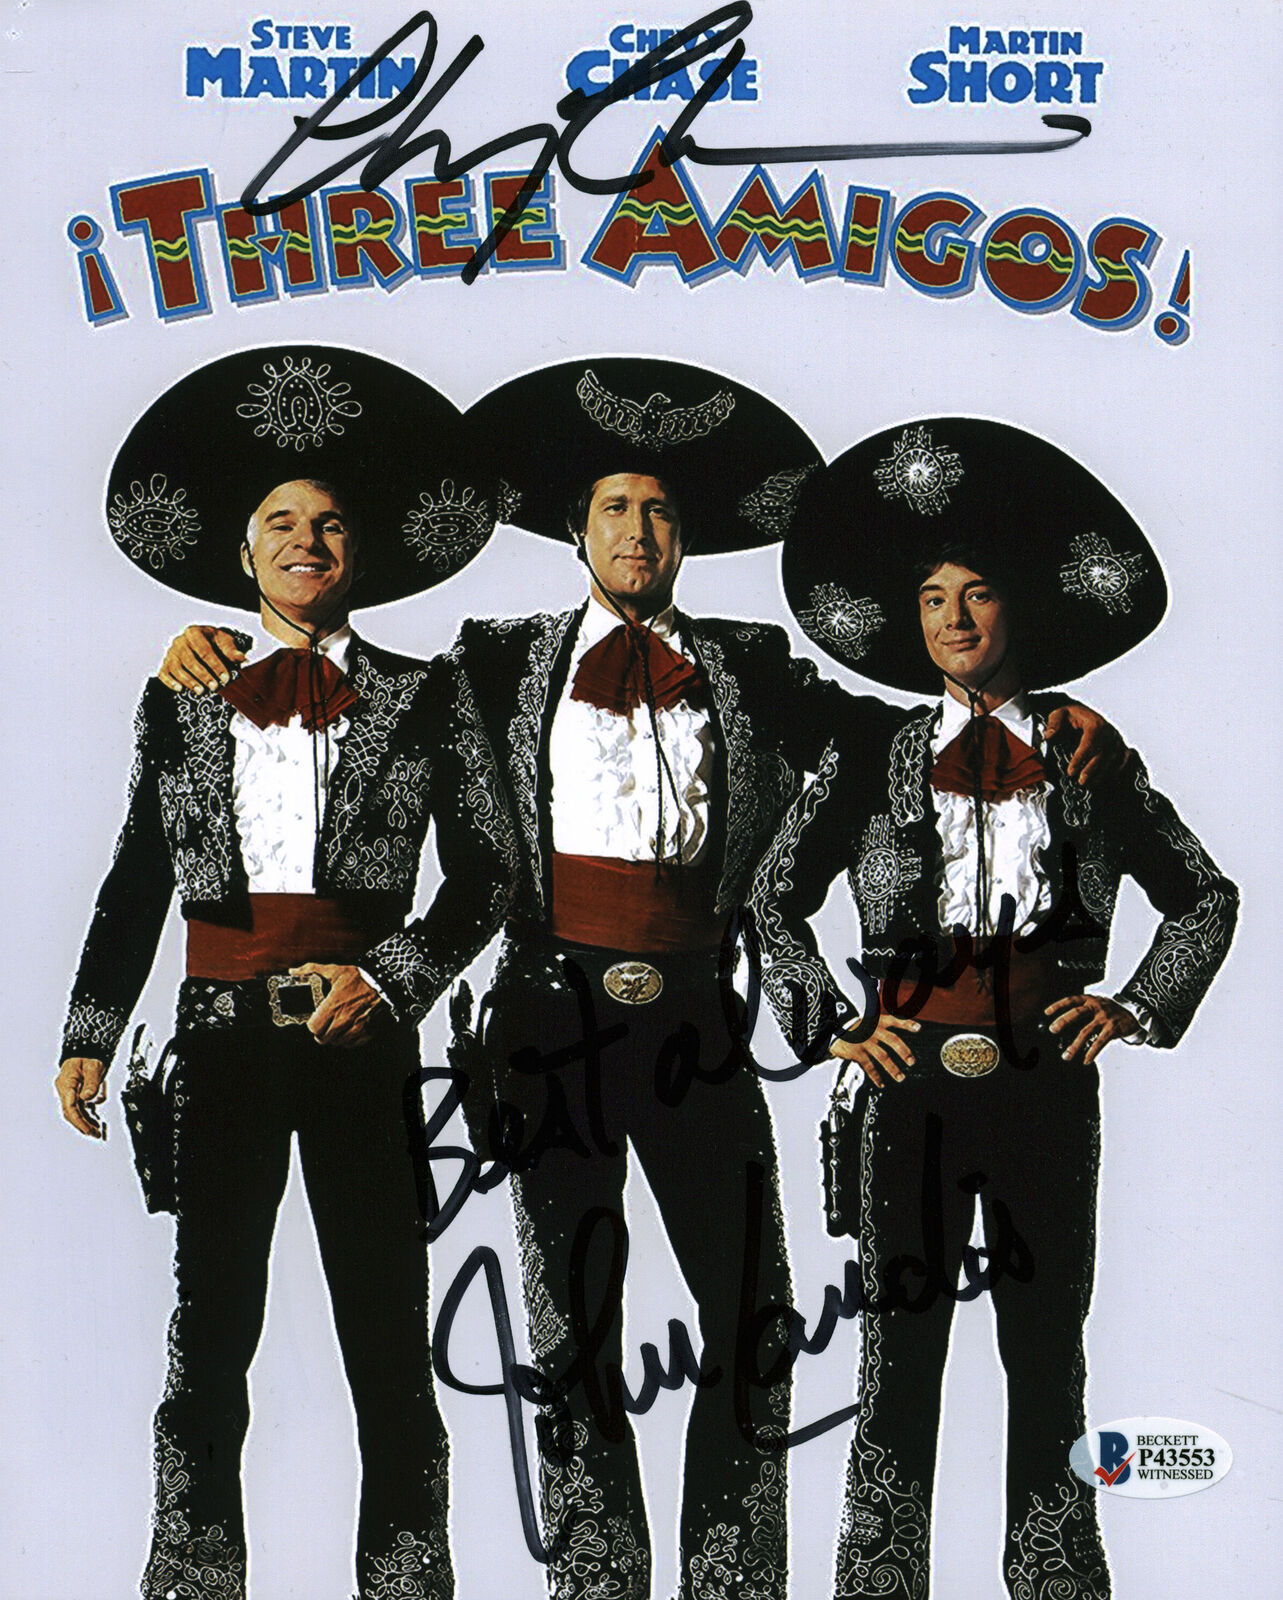 Chevy Chase & John Landis Three Amigos! Authentic Signed 8x10 Photo Poster painting BAS #P43553